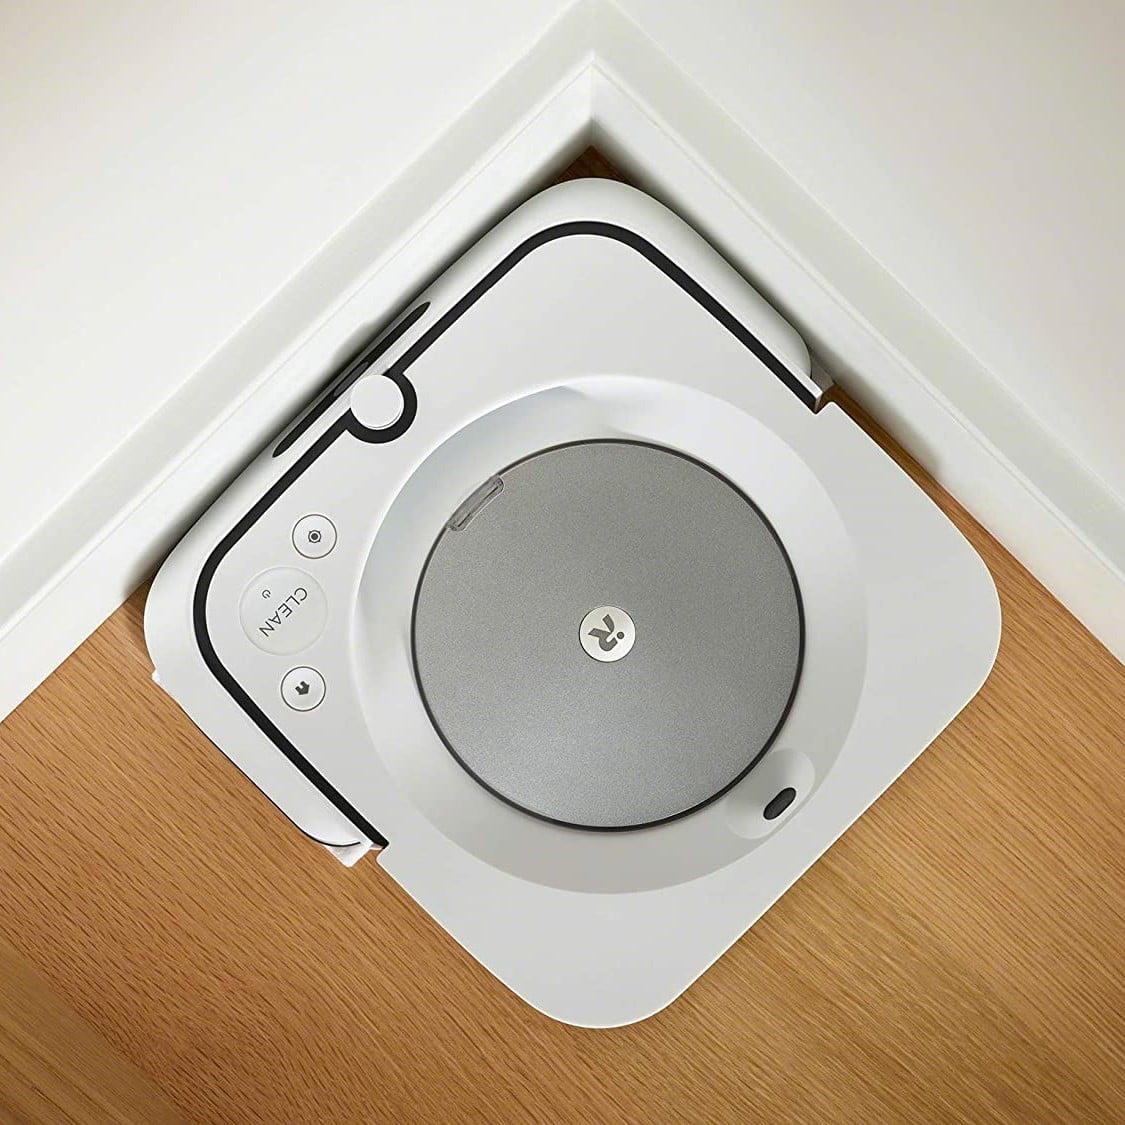 Irobot &Lt;H1&Gt;Irobot Braava Jet M6 Robot Mop - M613840&Lt;/H1&Gt; Https://Www.youtube.com/Watch?V=Ymk_2Jp_Edc * Irobot Braava M6 Robot Mopping * Navigation: Cliff Detect To Avoids Stairs, Navigates Under And Around Furniture, Navigates In Neat Rows, * Smart Features: App Controlled, Work With Voice Command, Compatible With Alexa,Google,Ali Genie3 * Cleaning Features:specialized Corner Clean. * Smart Recharge And Resume Feature: When Battery Gets Low, The Robot Finds Its Base &Amp; Completely Recharges, Then Resumes Cleaning Where It Left Off. * Customization Features: Personalized Schedule Recommendations, Creates Favorite Cleaning Routines, Pet-Shedding Cleaning Suggestions, * Mopping Features: Vacuums Then Mops In Sequence: Imprint® Link Technology Lets Roomba® Robot Vacuum And Braava Jet® M6 Robot Mop Team Up To Vacuum, Then Mop Automatically In Perfect Sequence, * Adjustable Spray Level: Customize Your Robot'S Spray Level In The Irobot Home App.,Precision Jet Spray. Mopping Modes 2, * Mops Back And Forth Like You Would: Specially Designed To Mop Back-And-Forth Just Like You Would. Works With Single Use And Washable Pads &Lt;Pre&Gt;Warranty: 2 Years On Robot, 1 Year On Battery&Lt;/Pre&Gt; Irobot Braava Jet M6 Irobot Braava Jet M6 Robot Mop - M613840